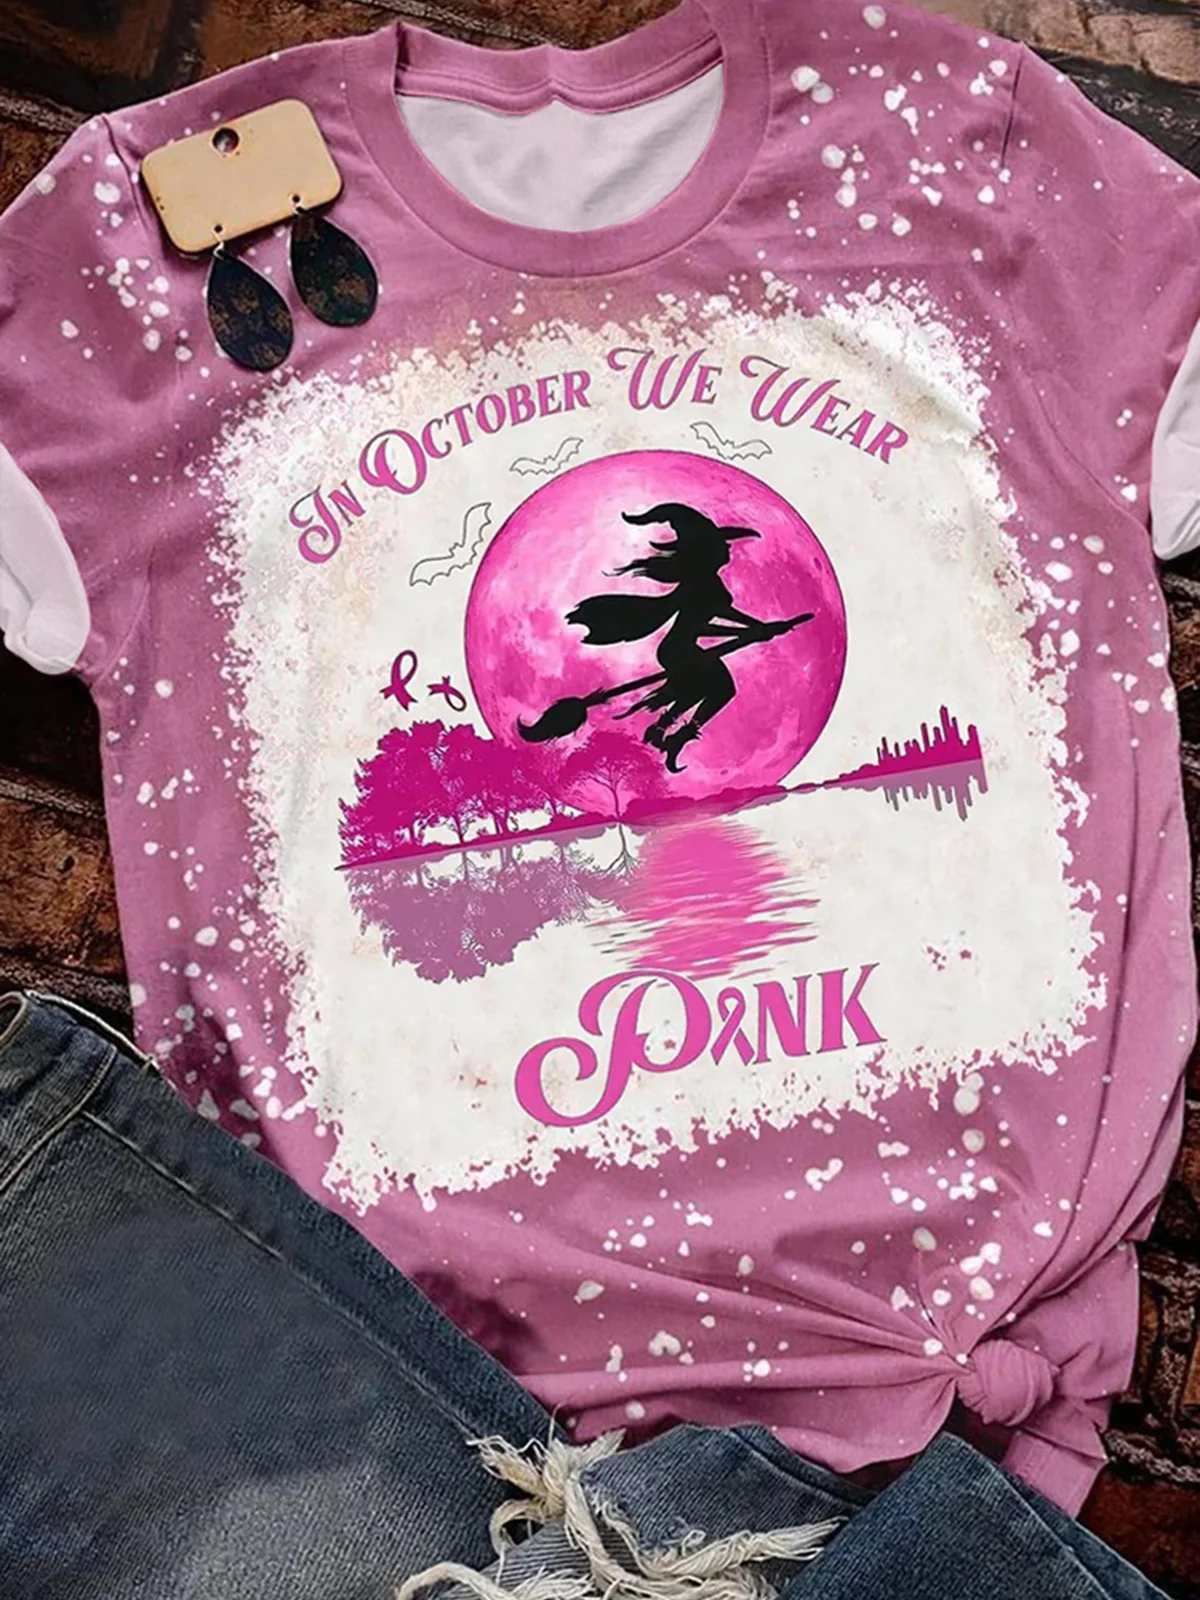 

2023 In October We Wear Pink Breast Cancer Awareness Witch Leisure Short Sleeve O-Neck T-Shirt Tee Funny Femininity Clothing